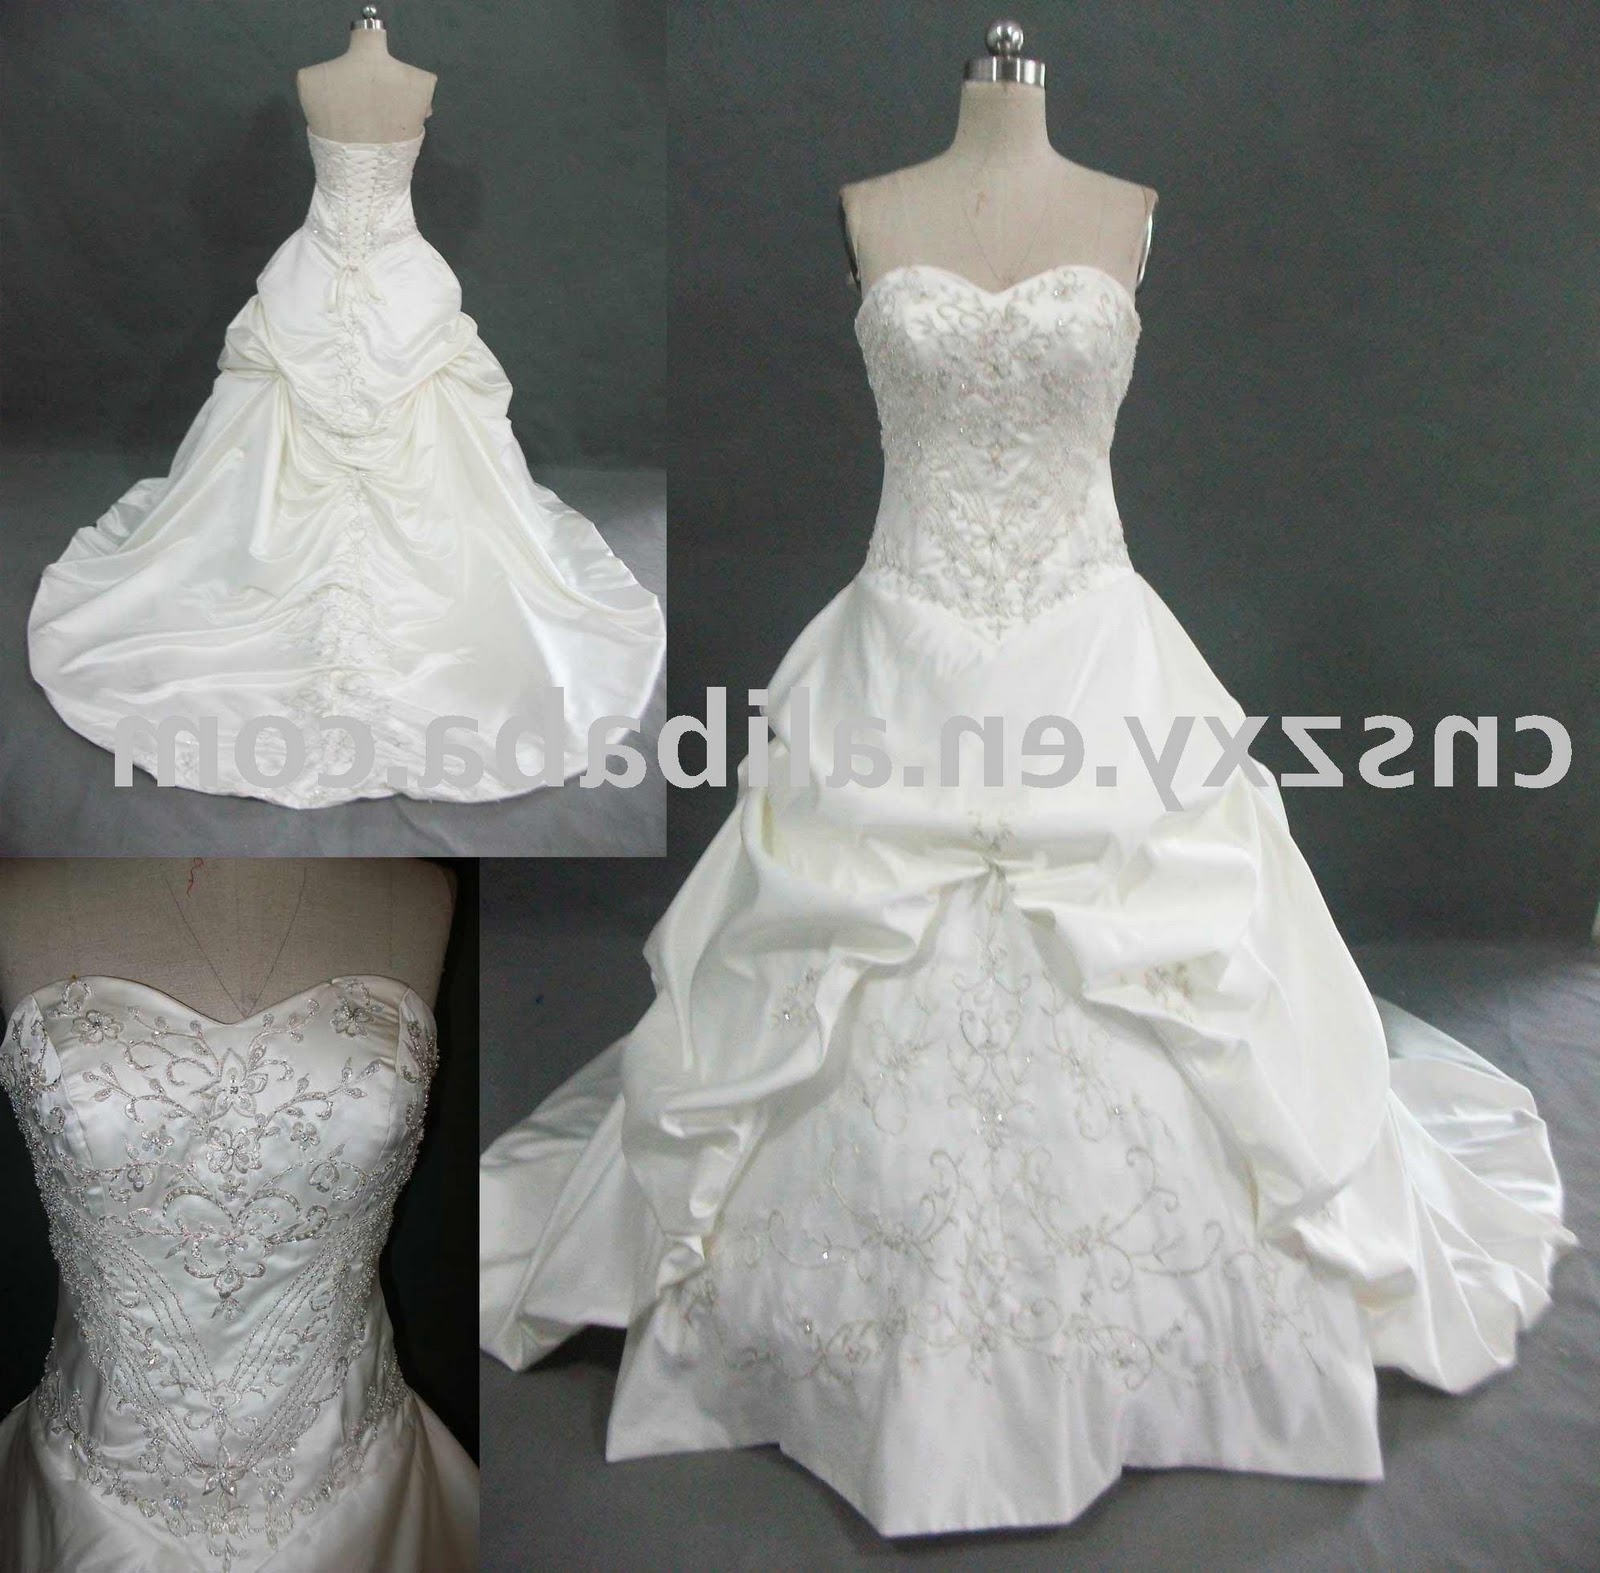 traditional wedding gown